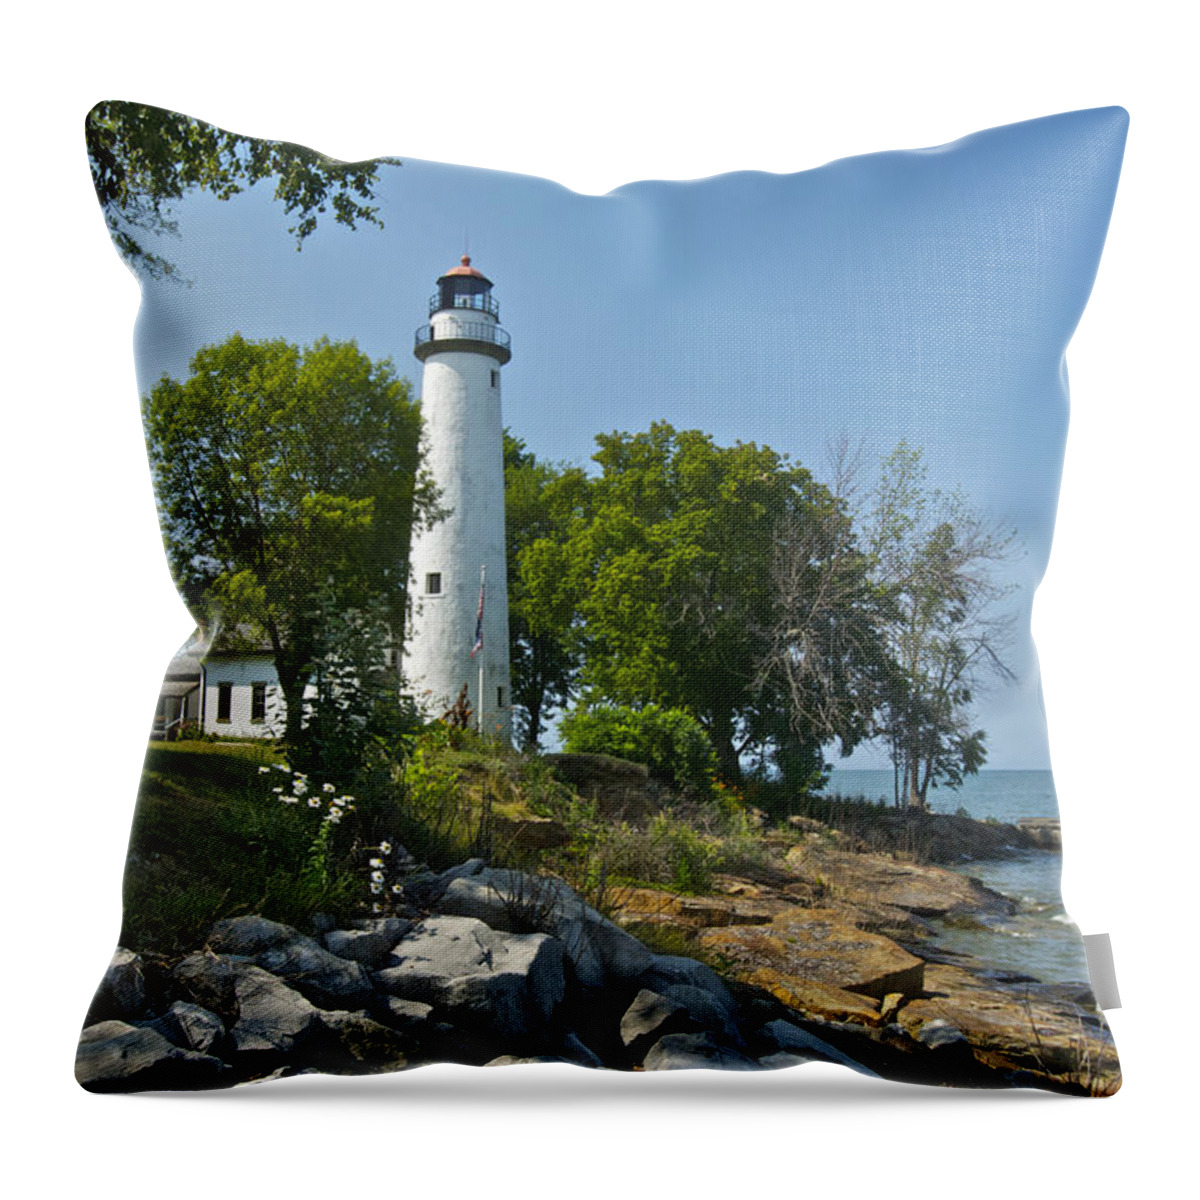 Landscape Throw Pillow featuring the photograph Pointe Aux Barques Lighthouse by Michael Peychich